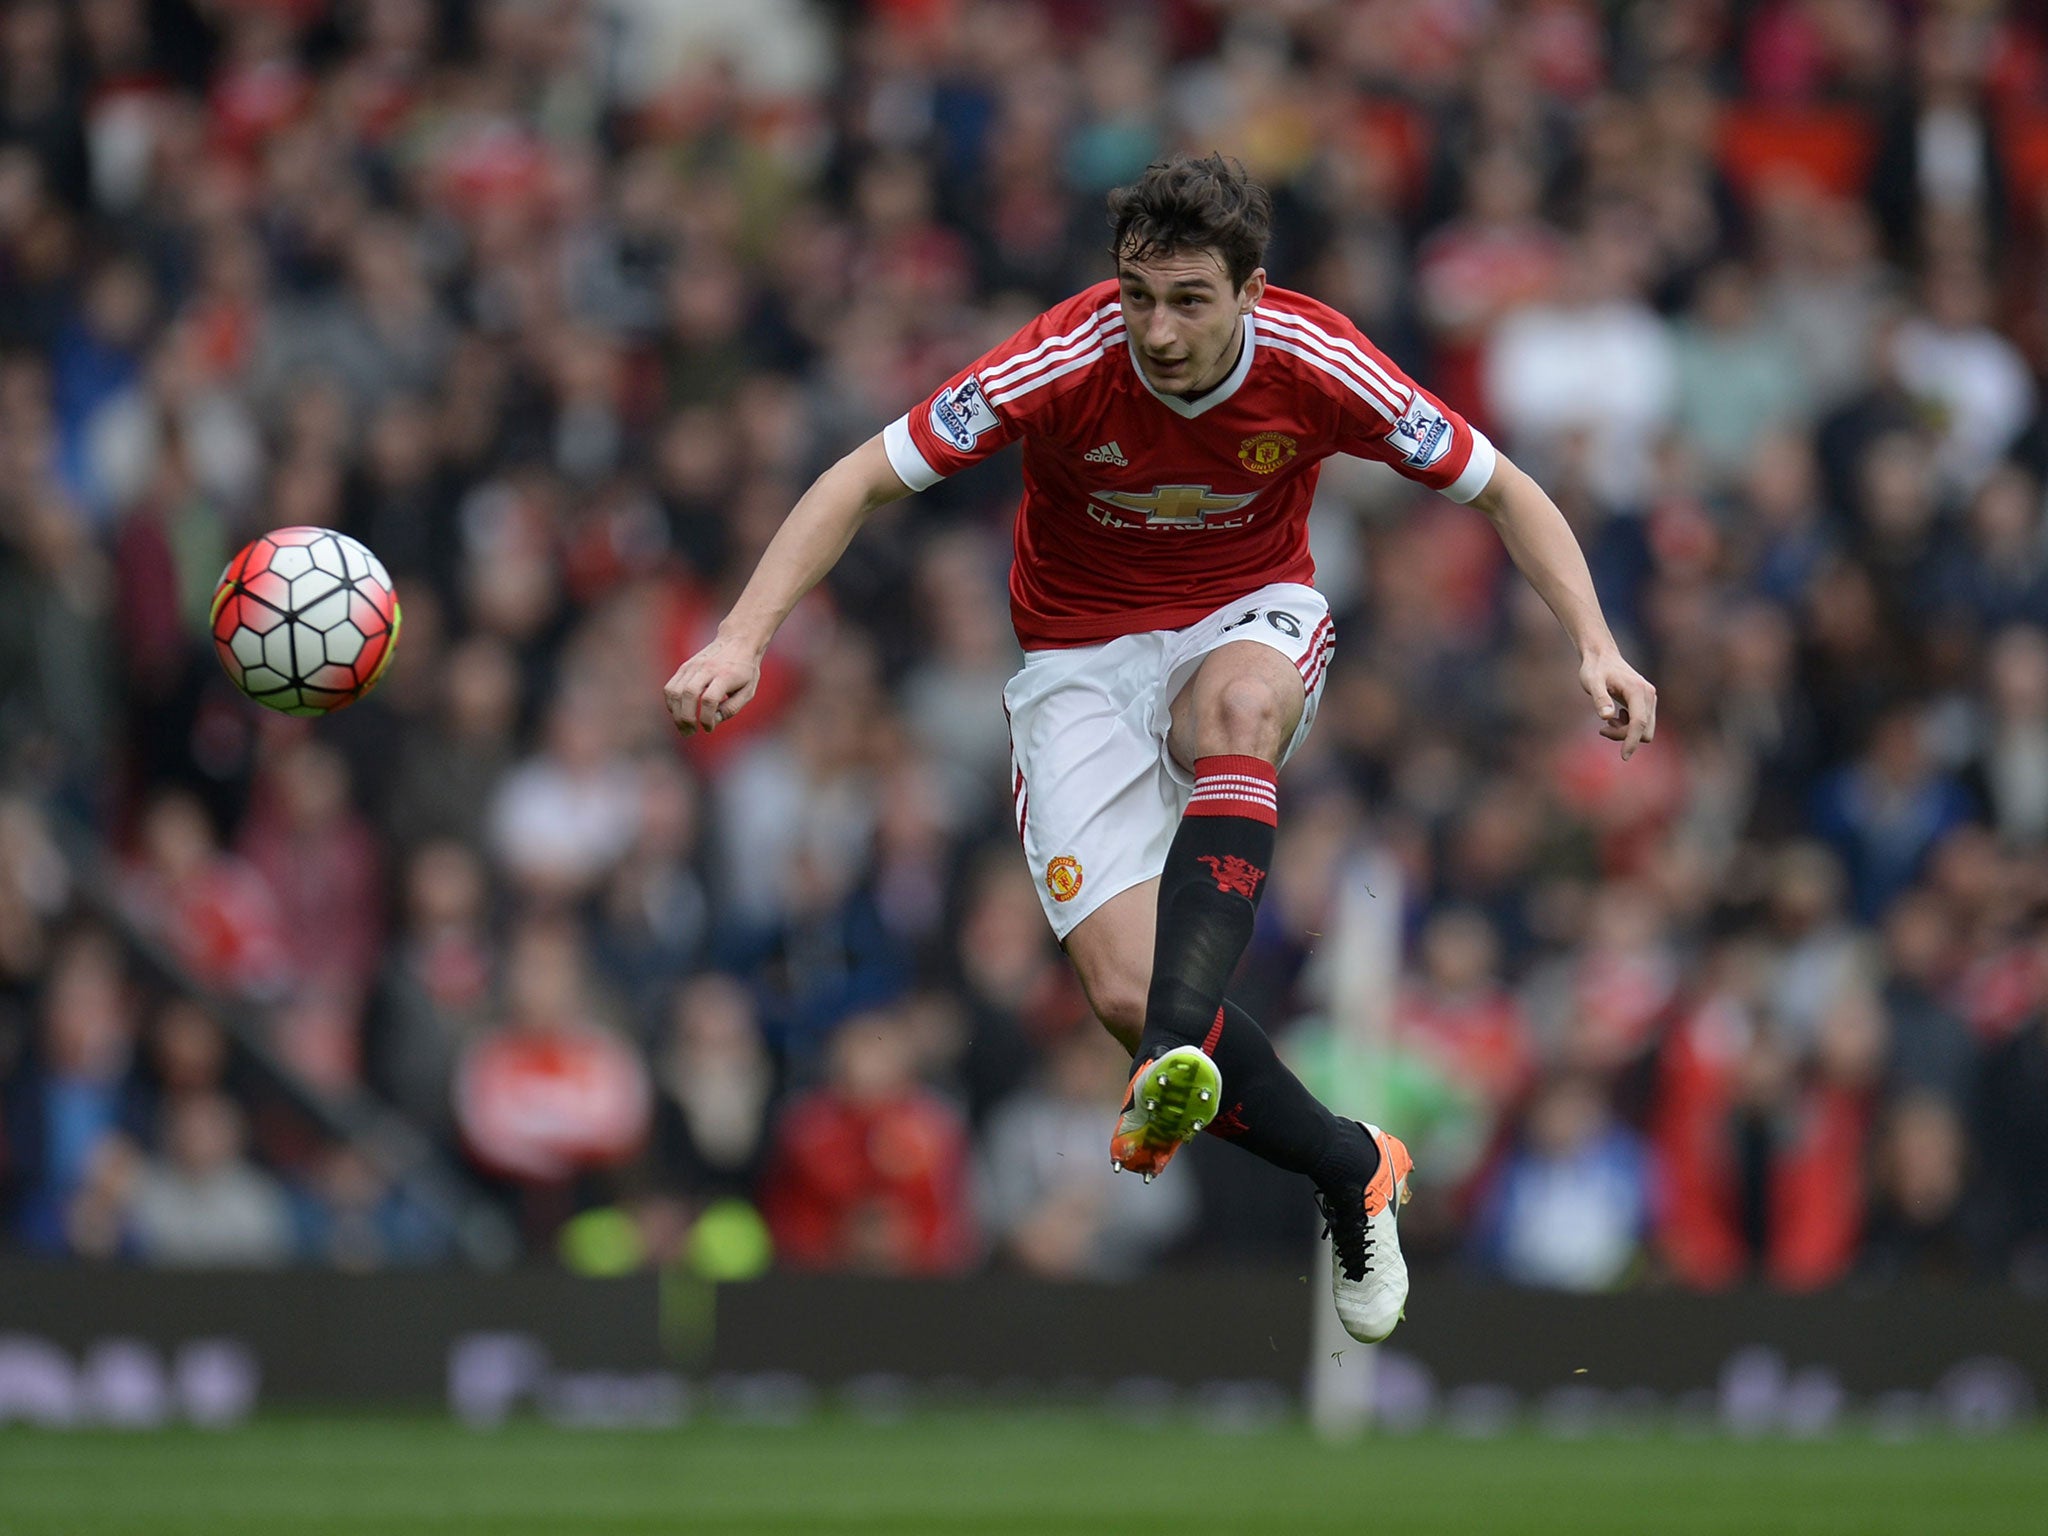 Matteo Darmian's days in a United shirt could be numbered